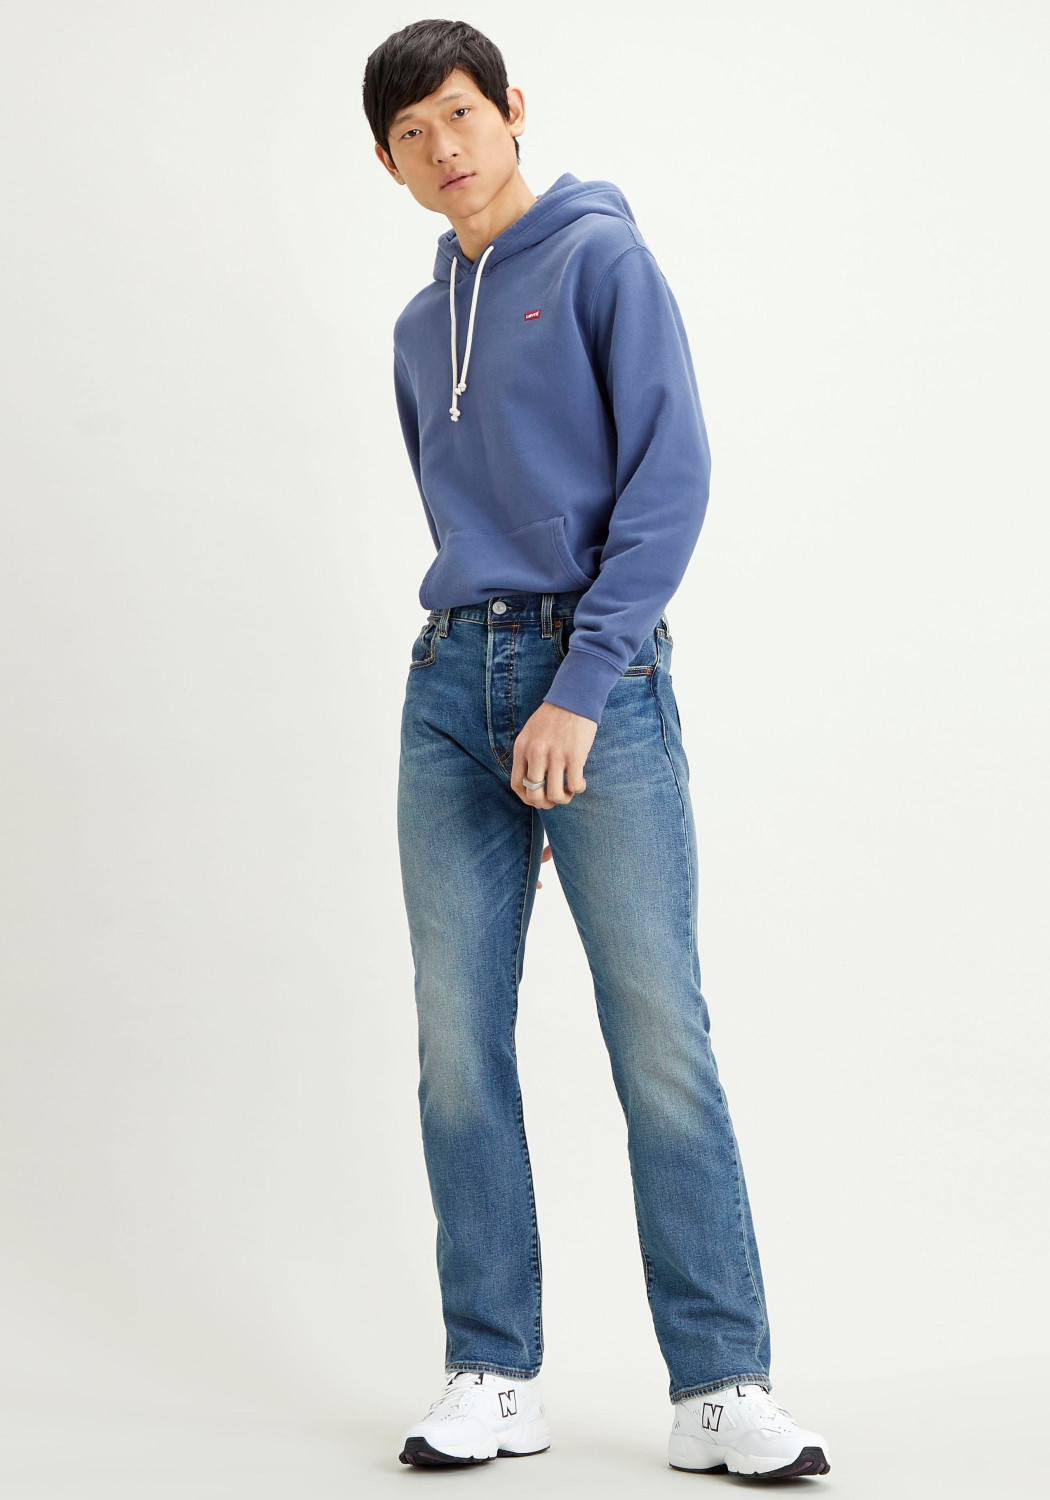 Buy Levi's 501 Original Fit candy paint from £61.04 (Today) – Best ...